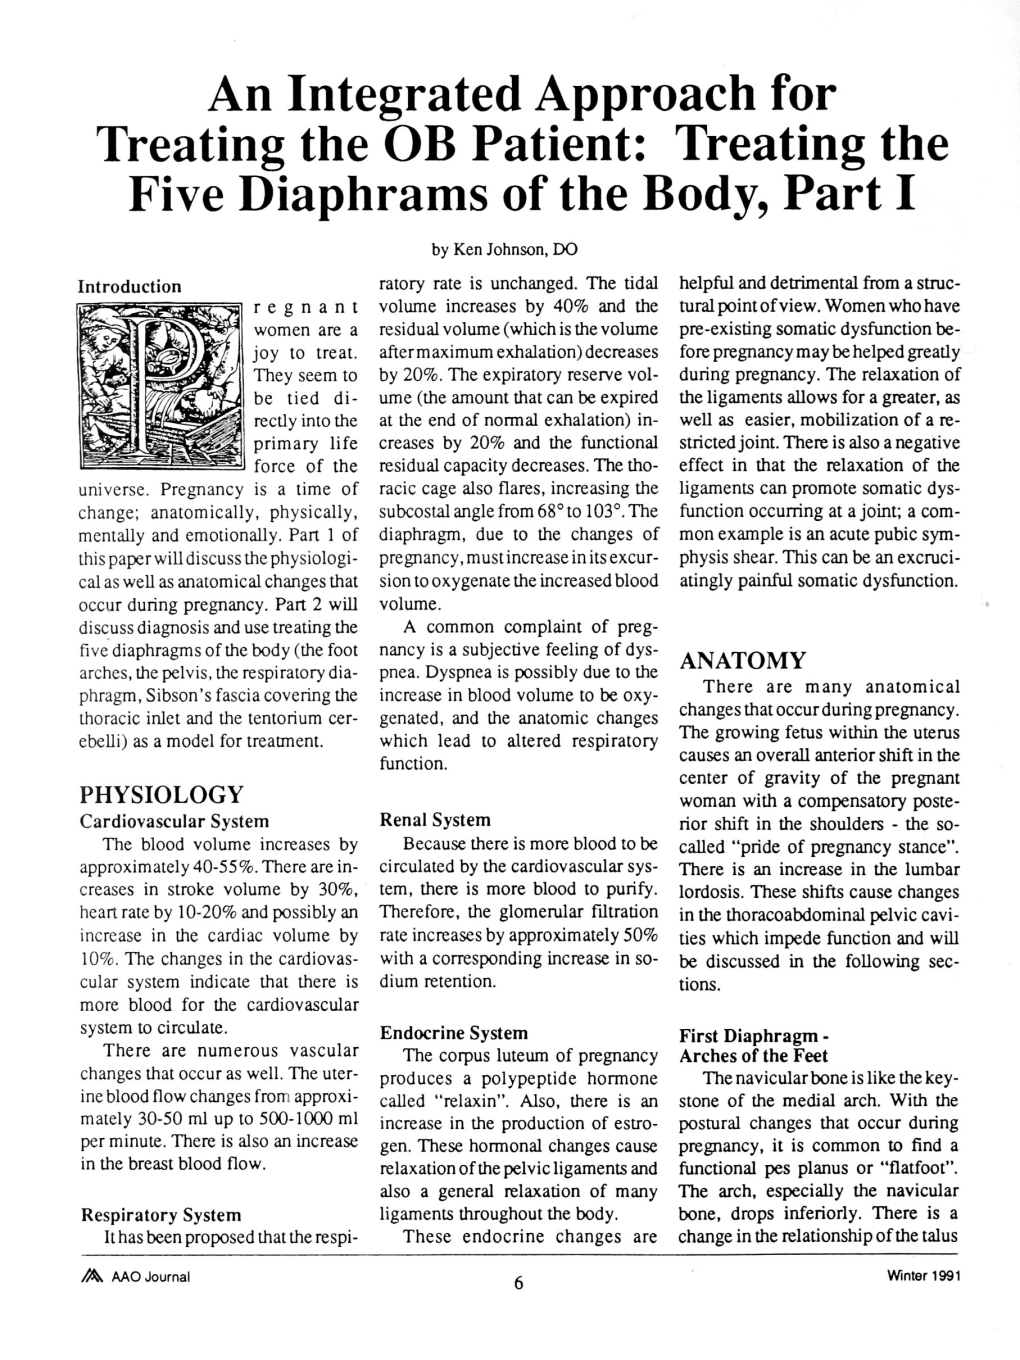 Treating the Five Diaphrams of the Body, Part I